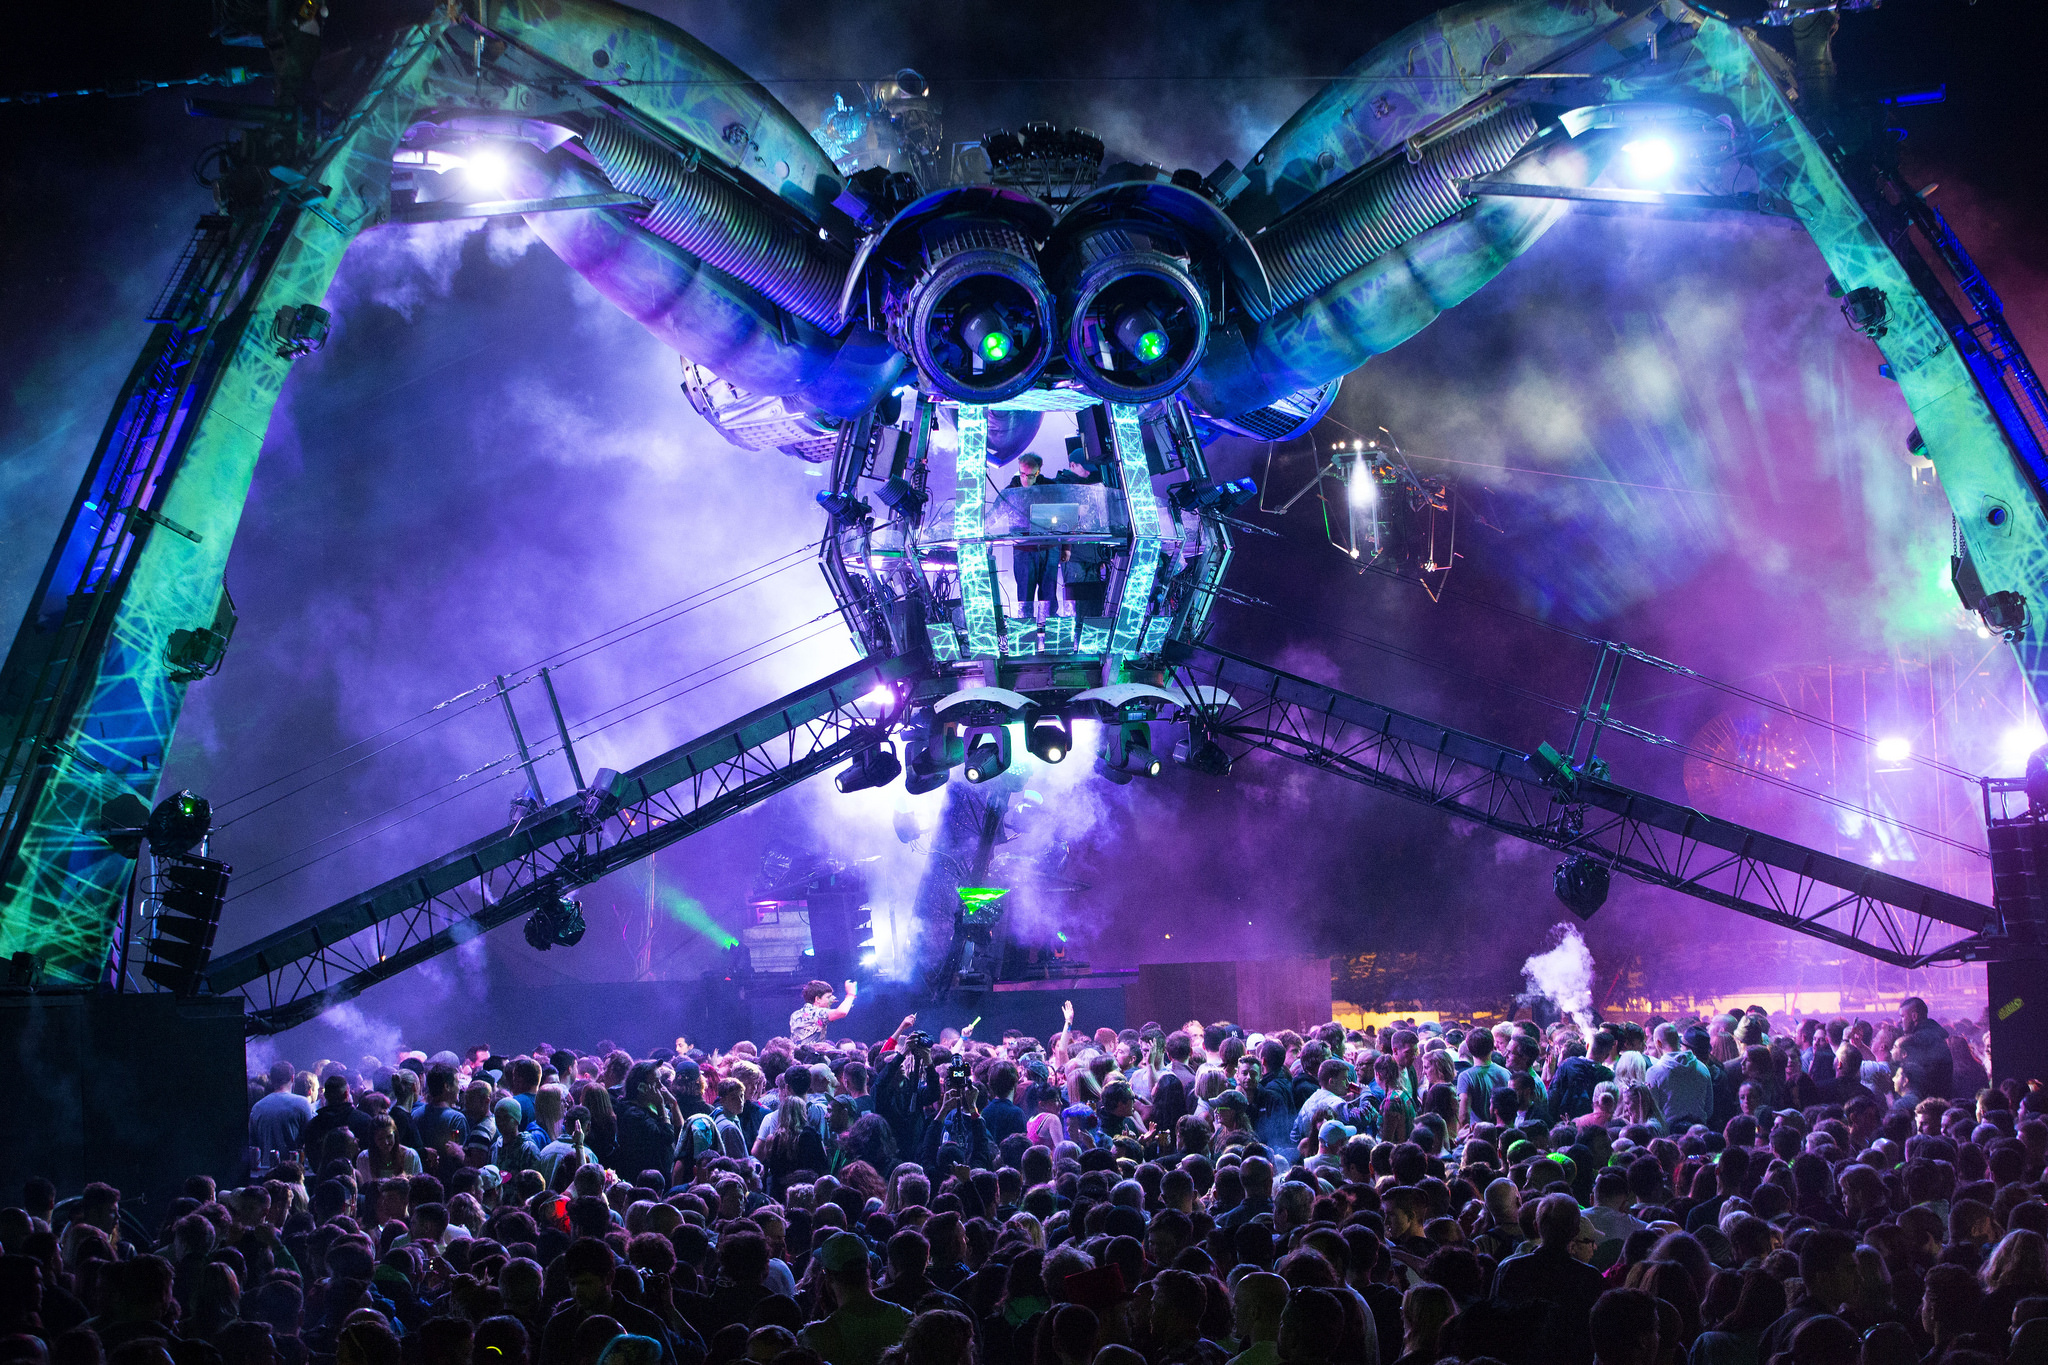 Purple mechanical spider in a crowd of people